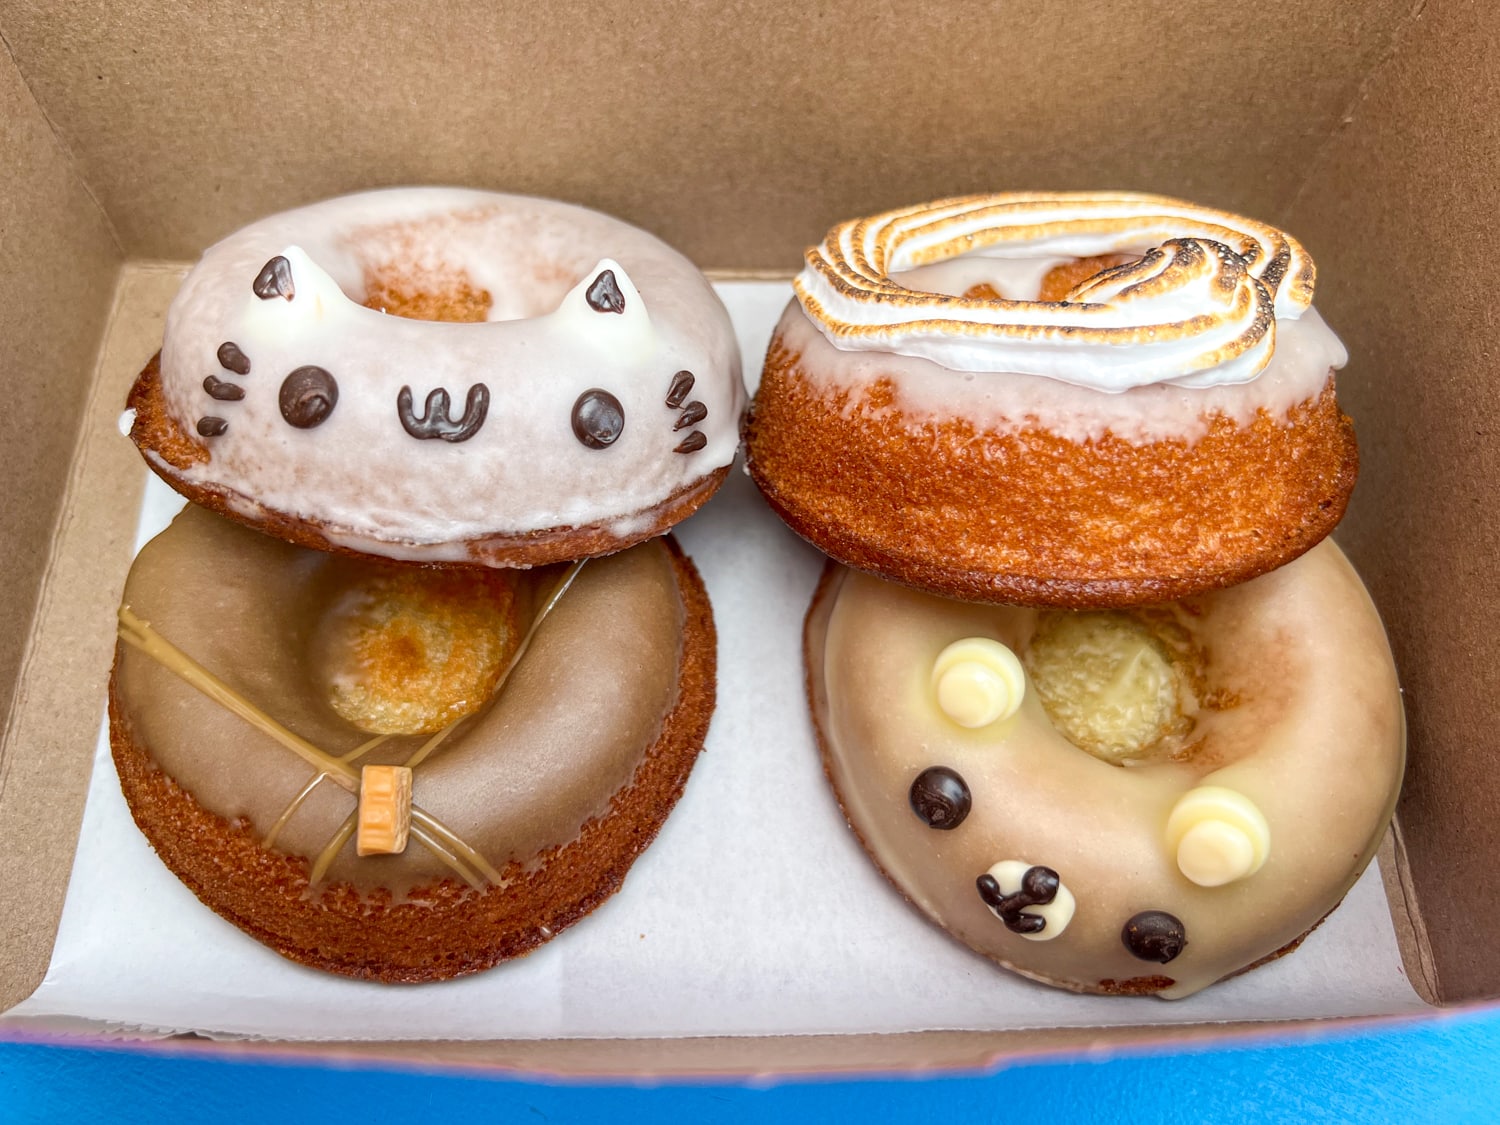 Four mochi donuts from OMG Squee in East Austin